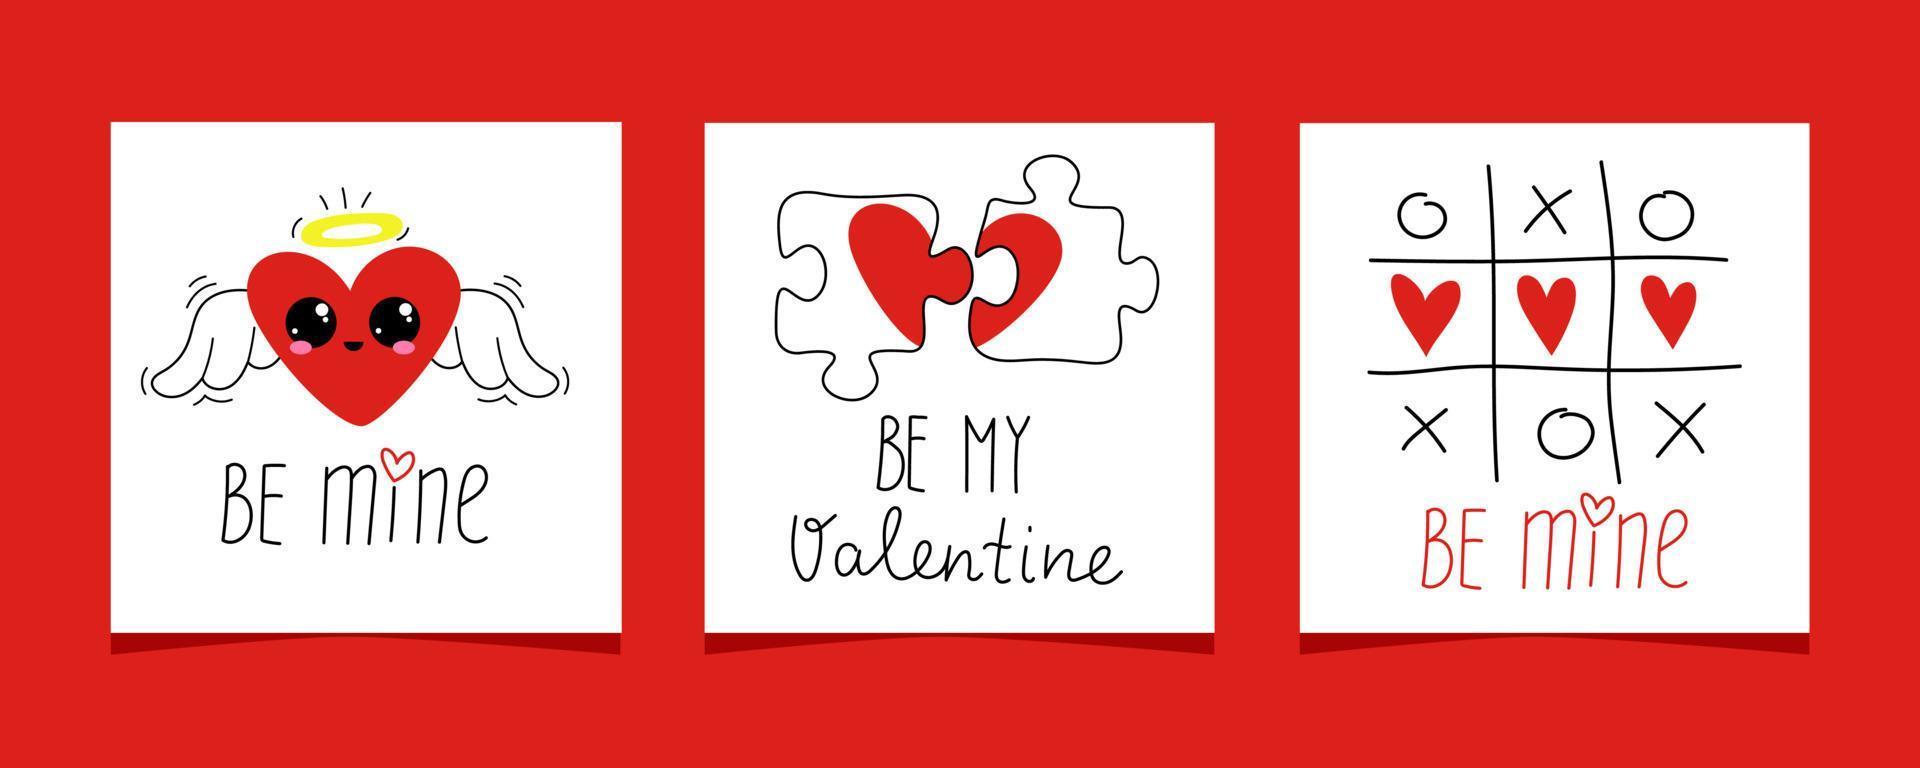 A set of romantic cards for Valentine's Day. Cute heart with wings, puzzles, Tic tac toe. Line style vector